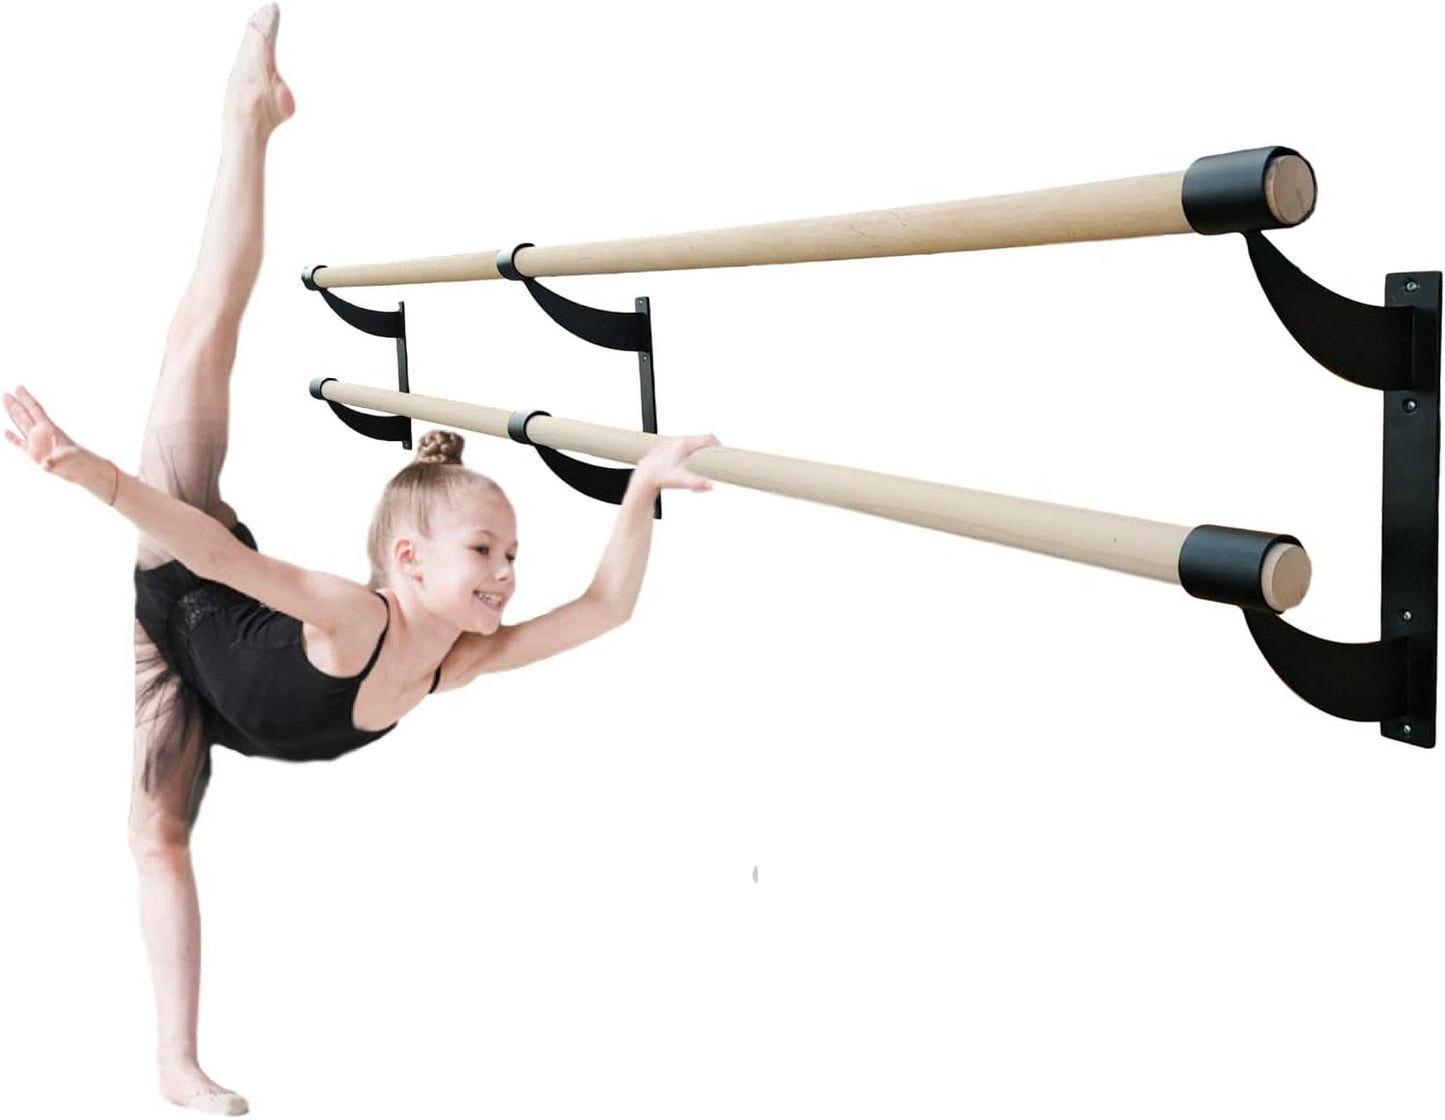 Ballet Barre Double Bar 8 FT Long Black 1.5” Diameter Wall Mounted | Fixed Height Ballet Barre System Traditional Wood | Home Studio Ballet Bar, Dance Bar, Stretch Bar, Dancing Stretching